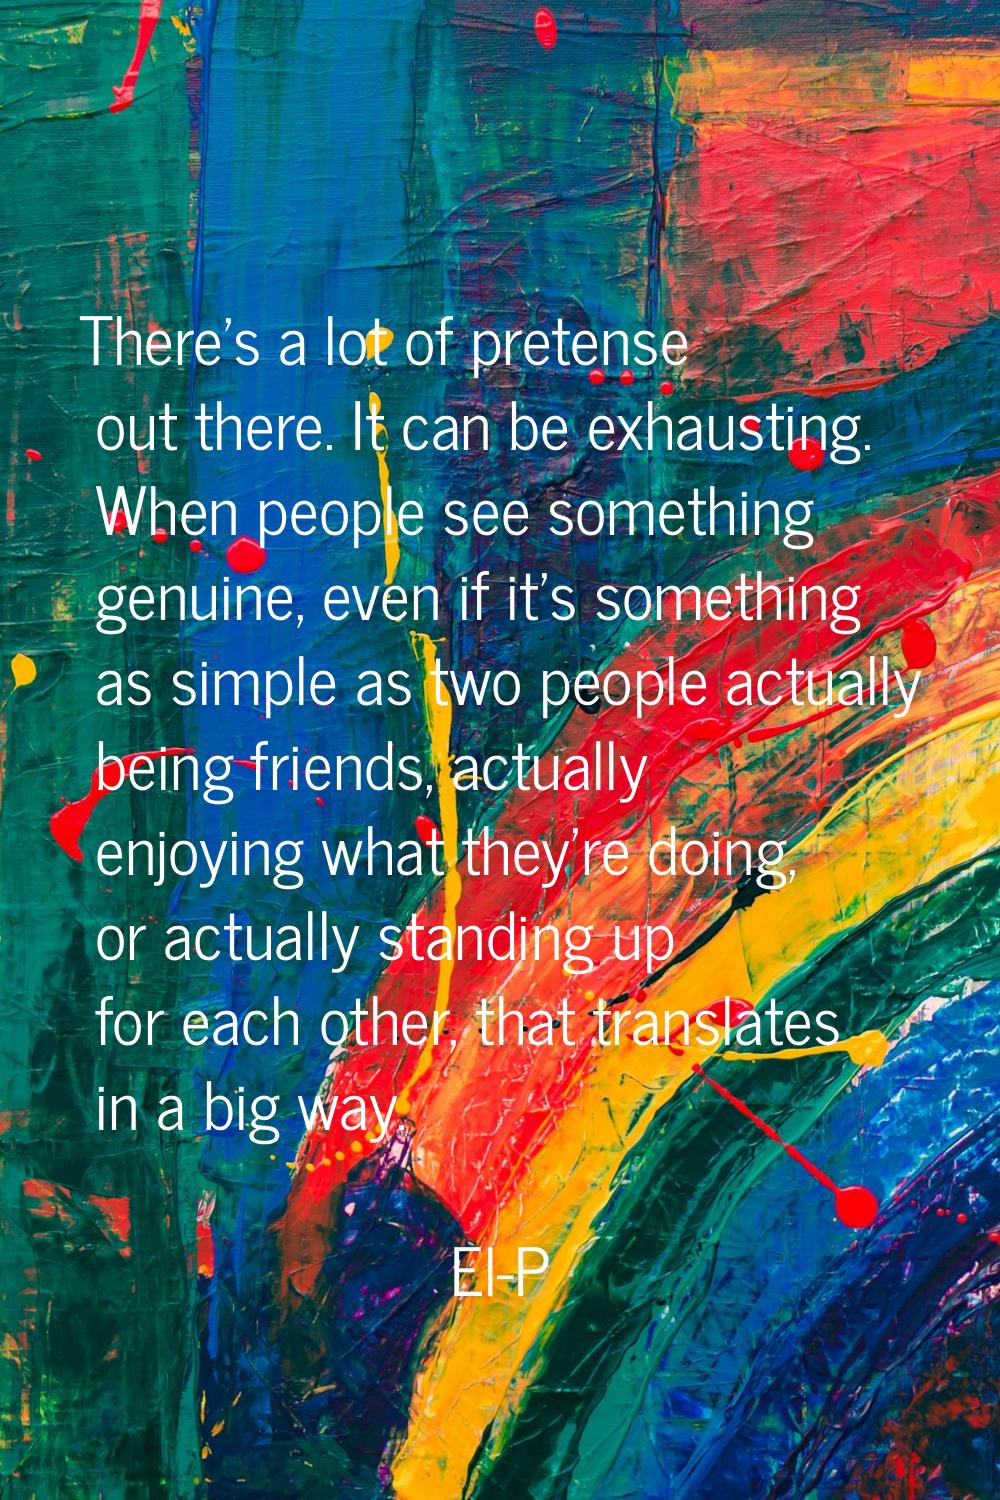 There's a lot of pretense out there. It can be exhausting. When people see something genuine, even 